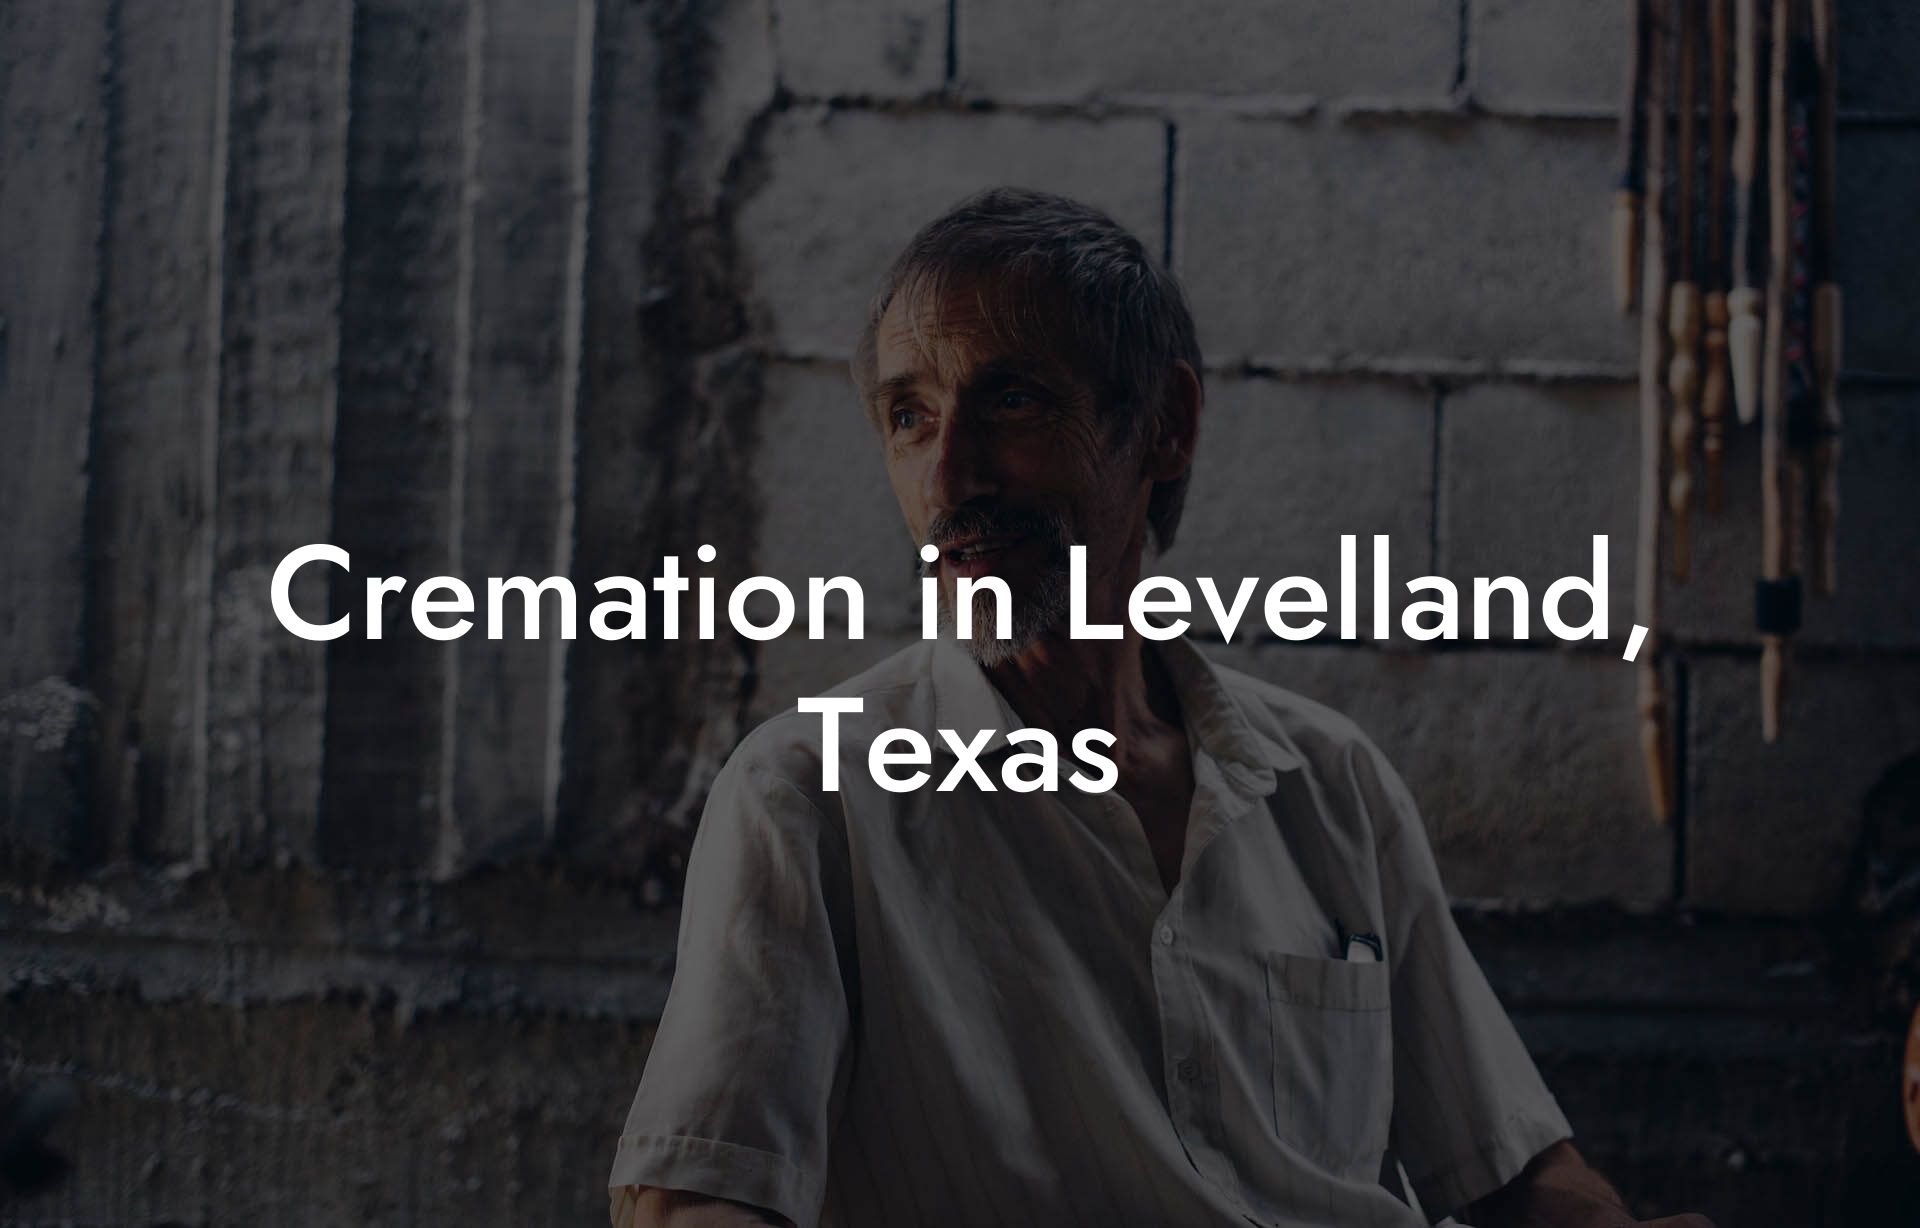 Cremation in Levelland, Texas